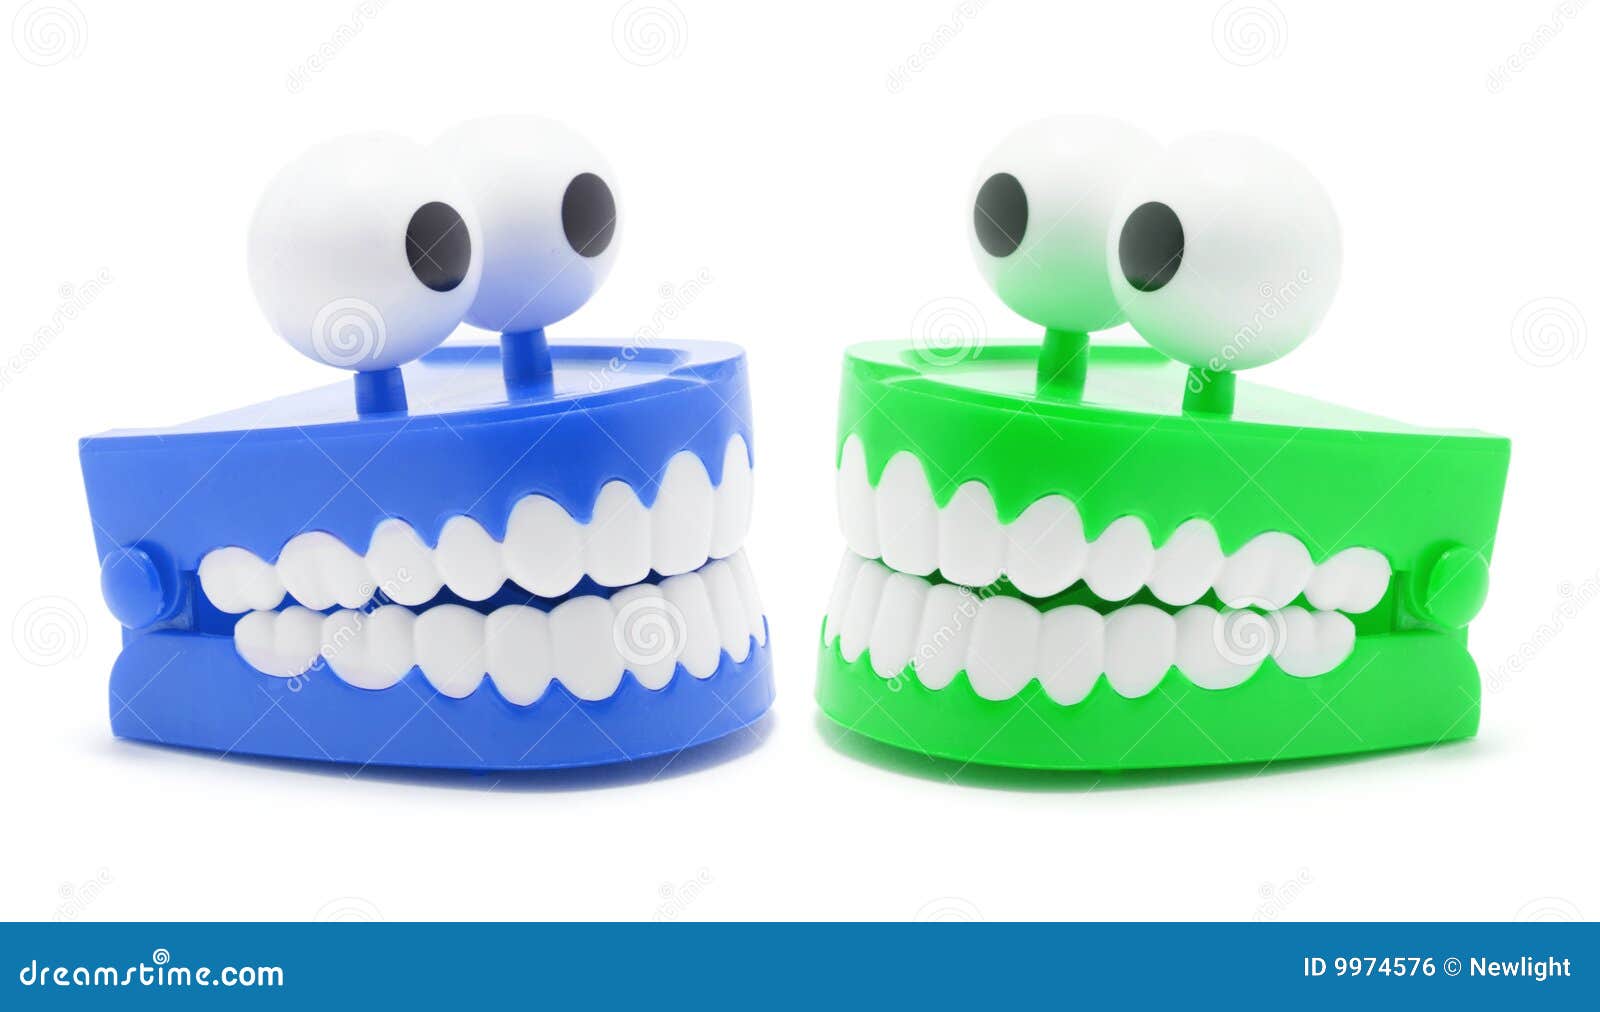 chattering teeth toy